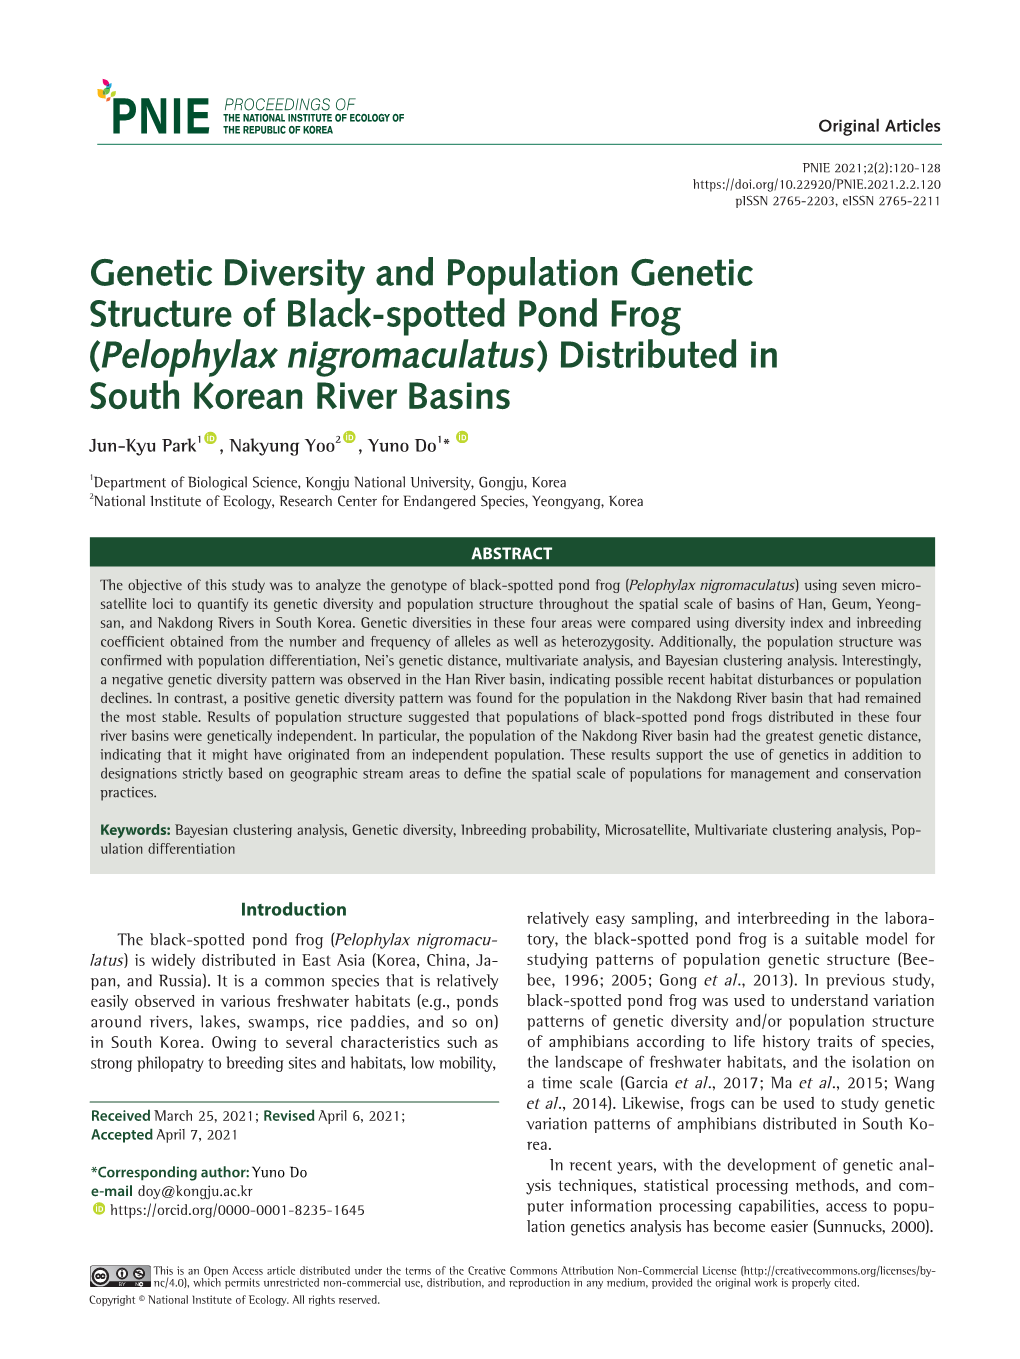 Genetic Diversity and Population Genetic Structure of Black-Spotted Pond Frog (Pelophylax Nigromaculatus) Distributed in South Korean River Basins